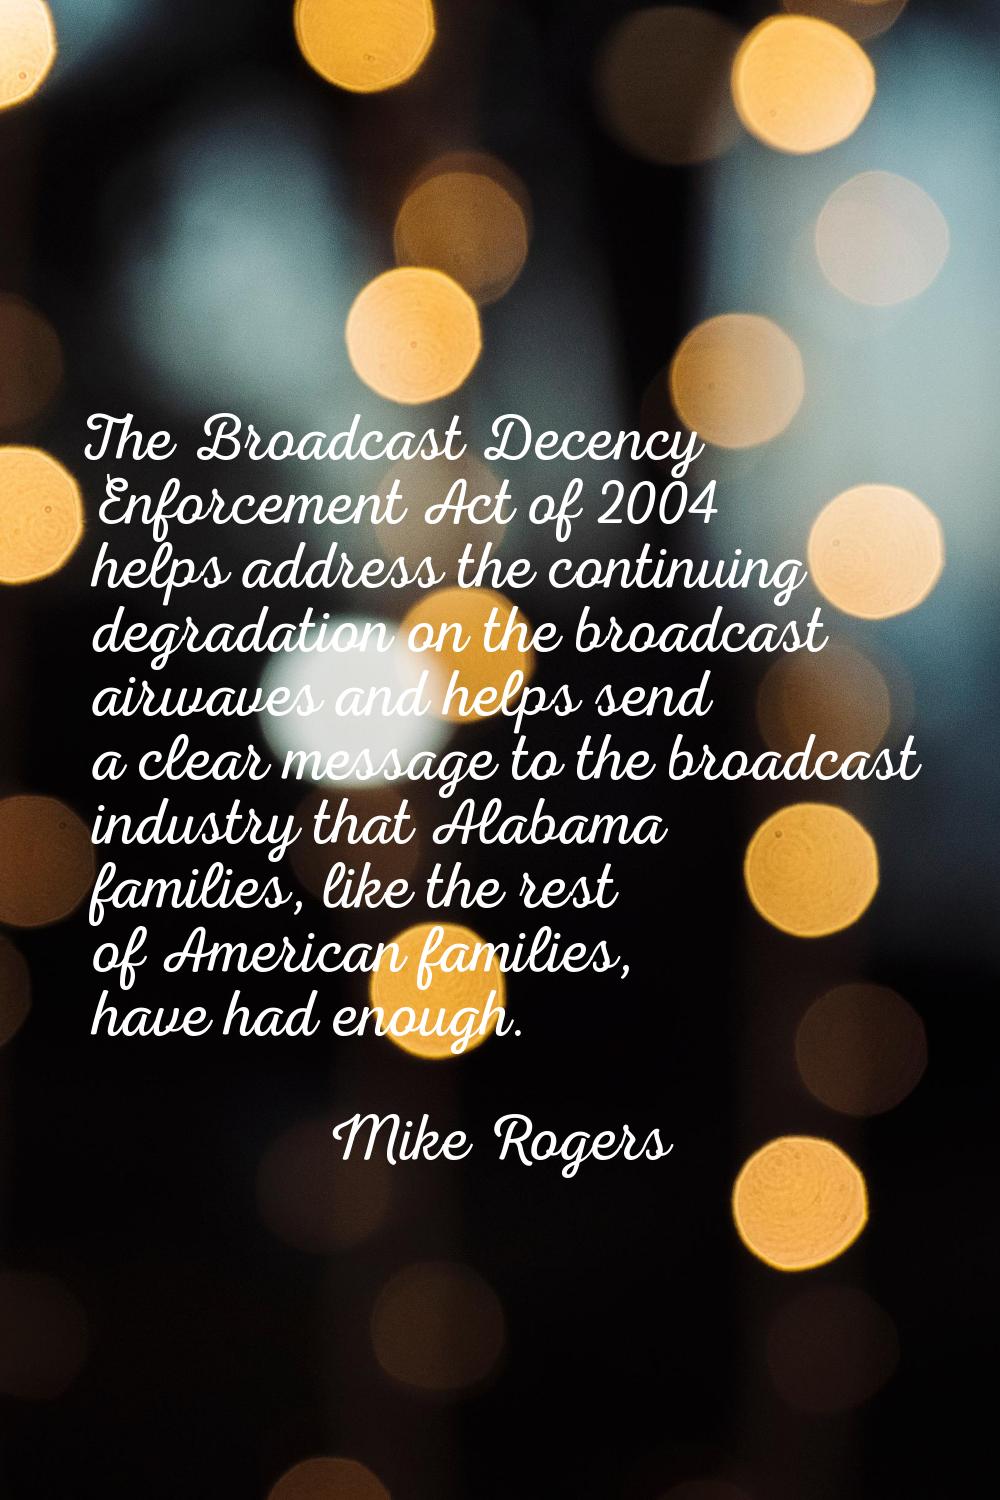 The Broadcast Decency Enforcement Act of 2004 helps address the continuing degradation on the broad